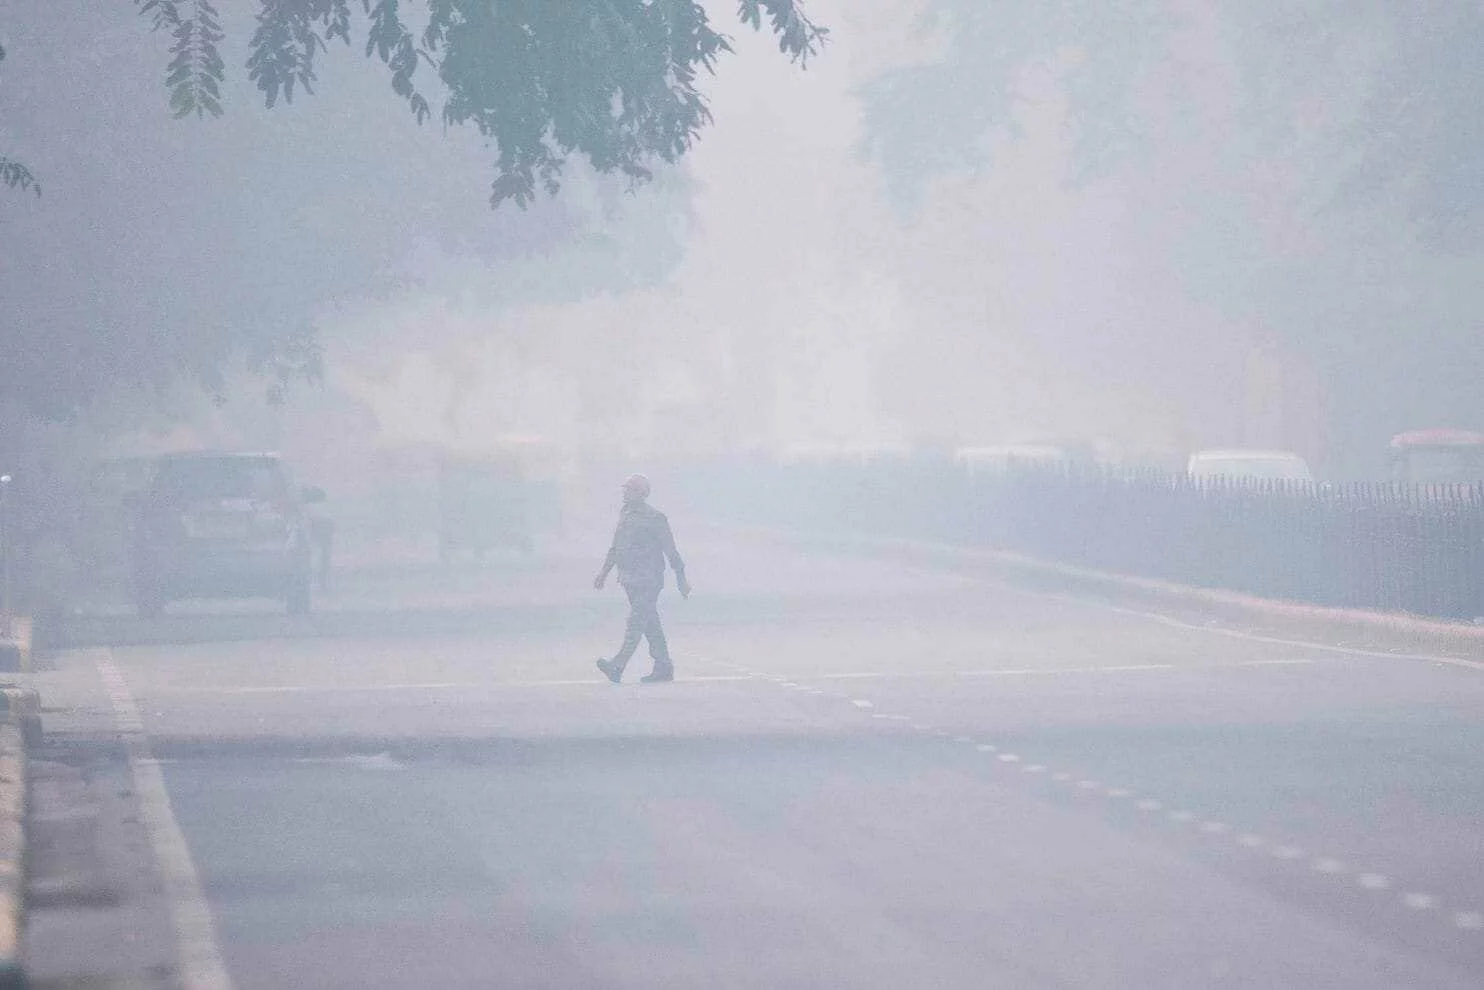 Analysis | The weather that’s trapping New Delhi beneath a deadly, toxic haze